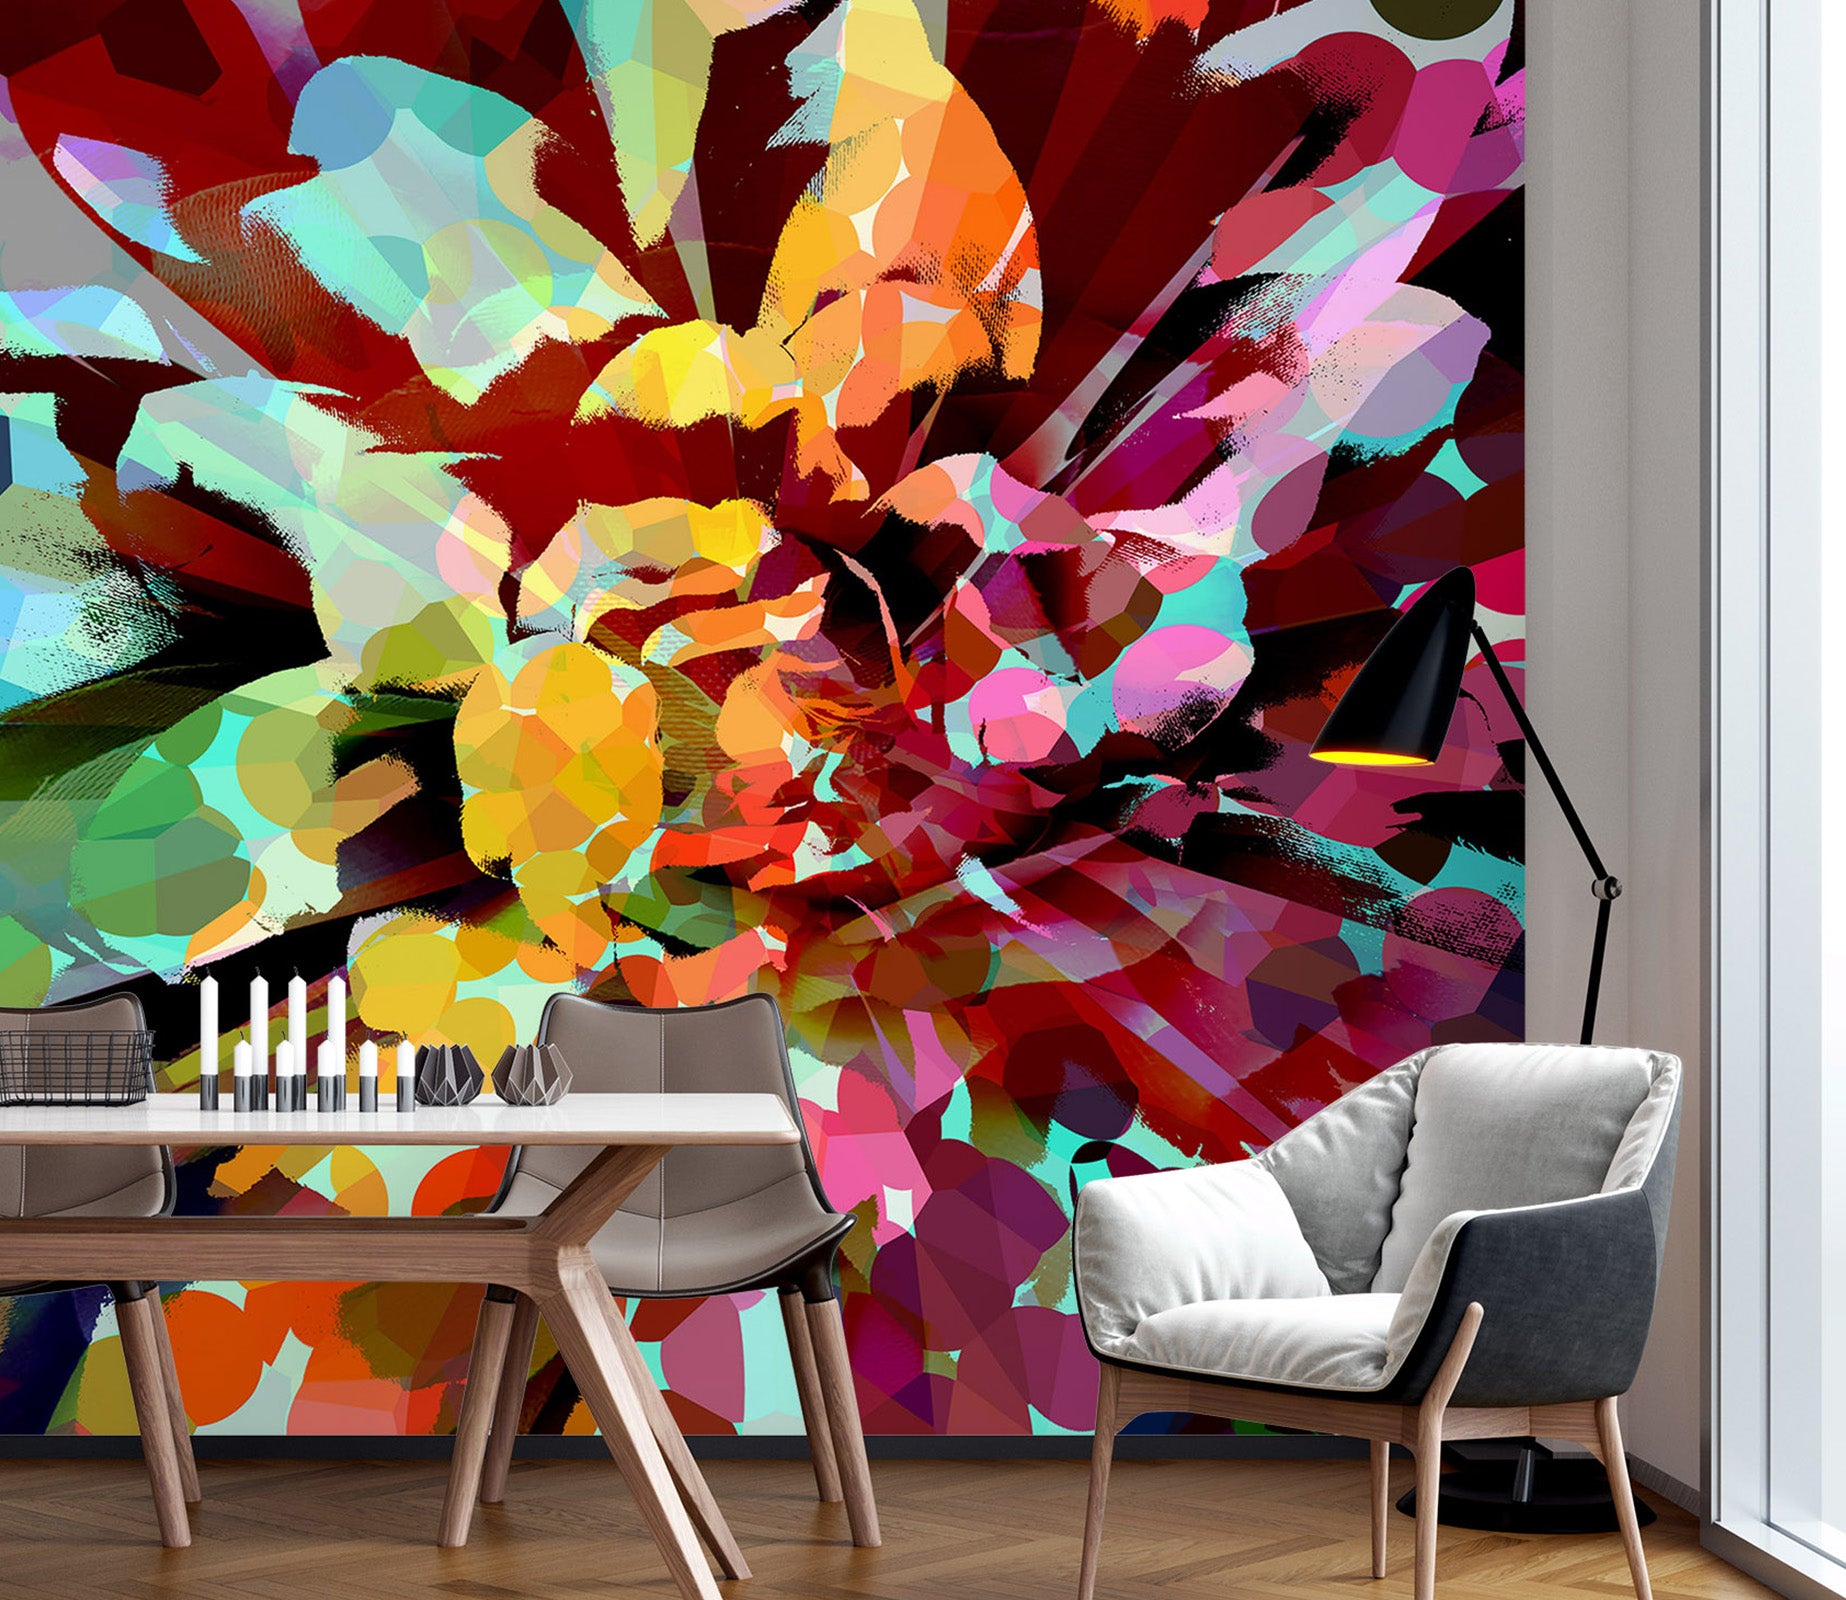 3D Colorful Pattern 19110 Shandra Smith Wall Mural Wall Murals